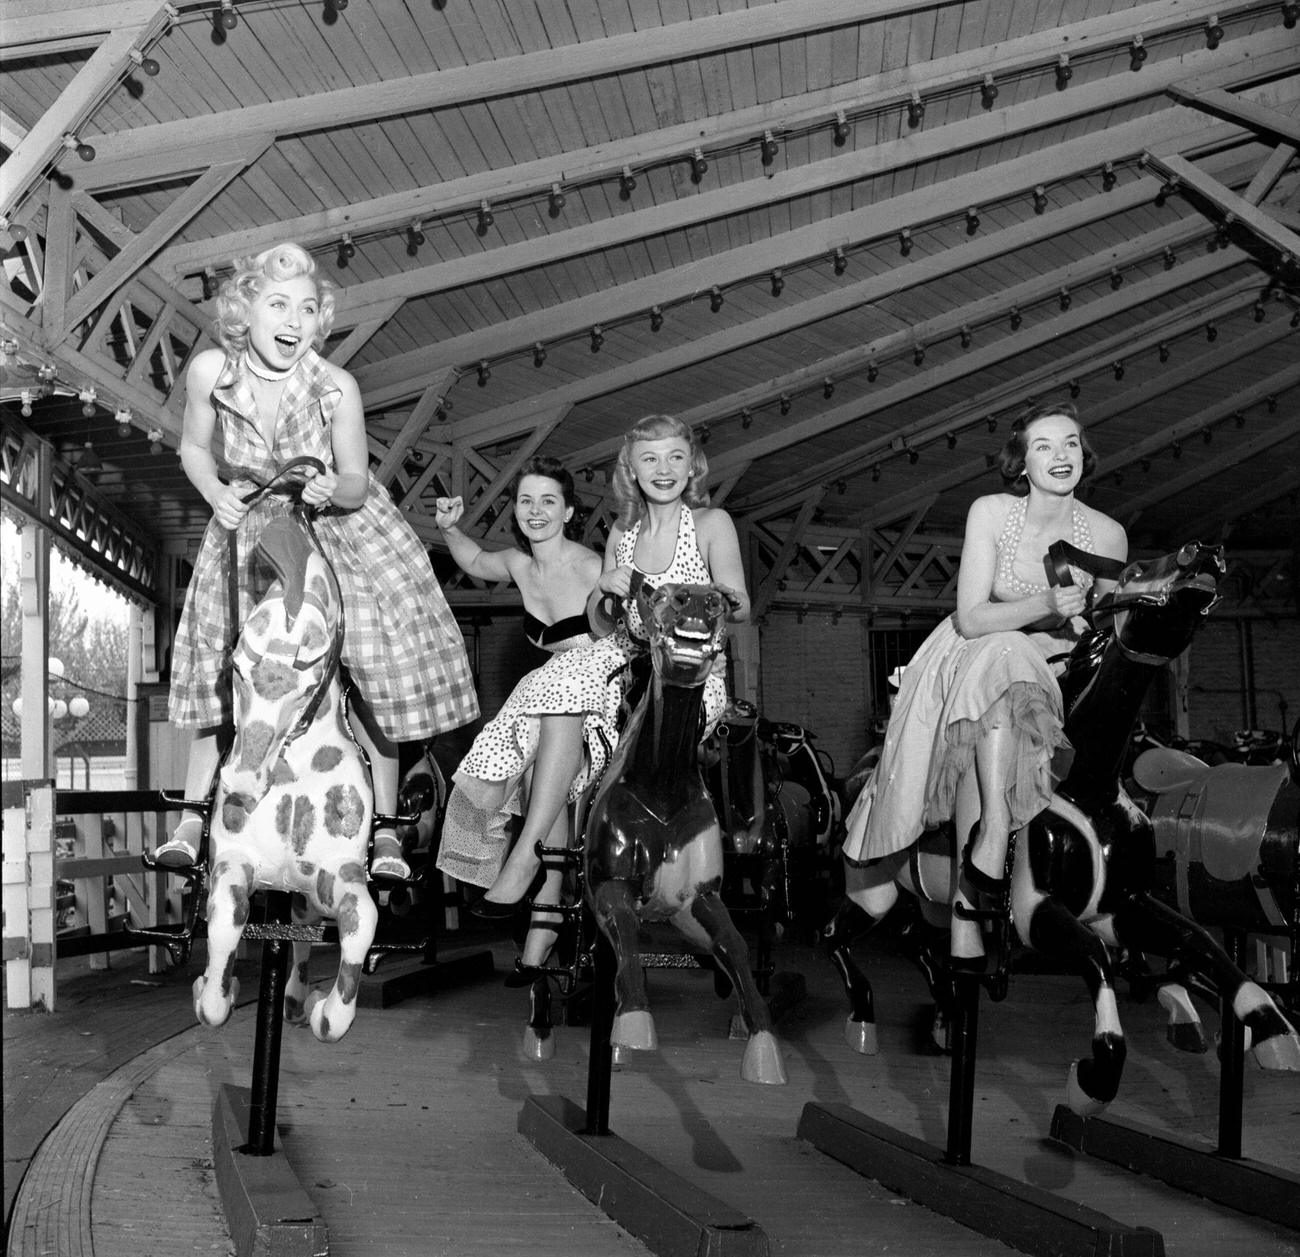 Cbs Models Enjoy The Great American Derby Racer, May 1953